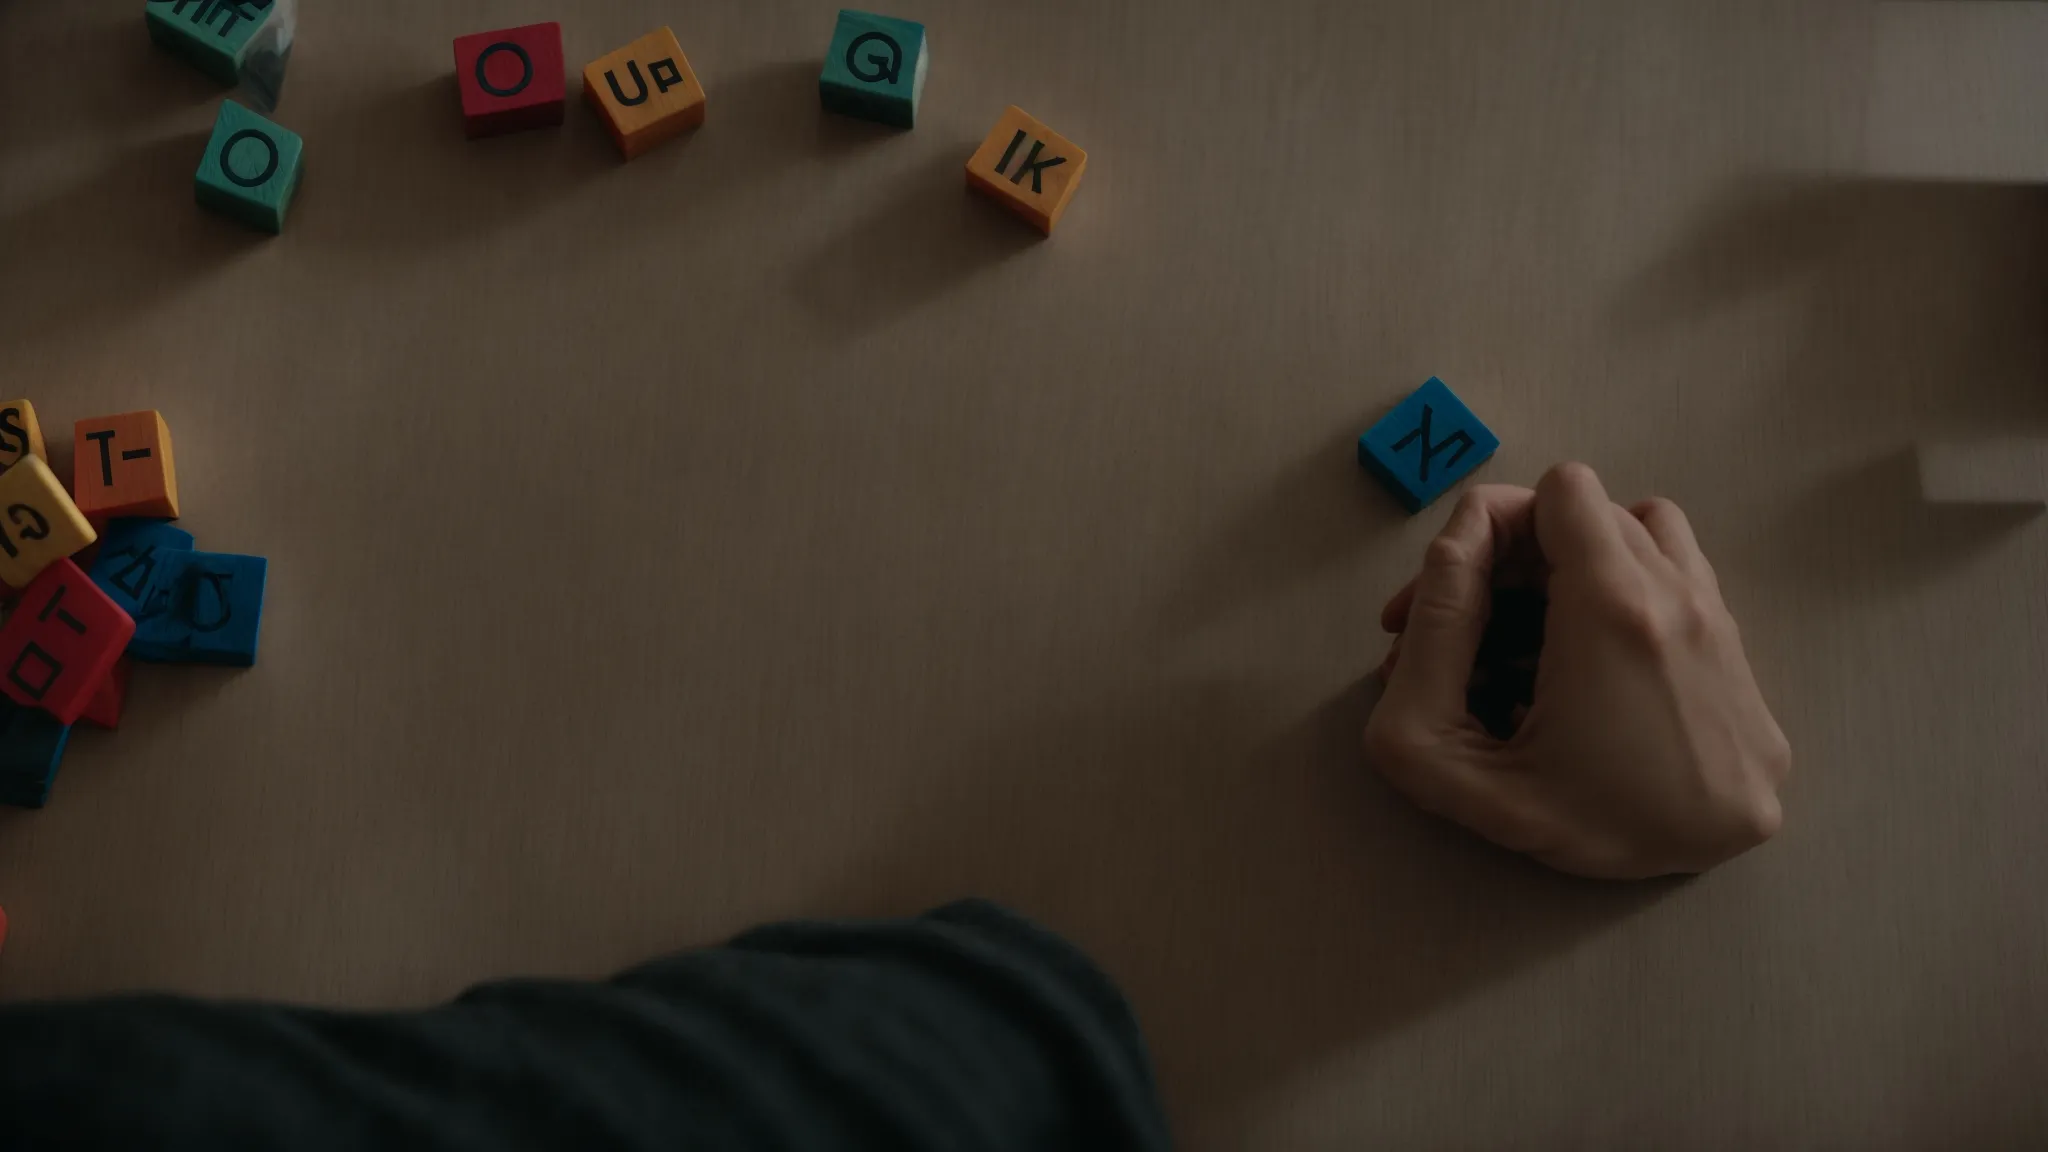 a person thoughtfully arranging alphabet blocks on a table to form a web address.